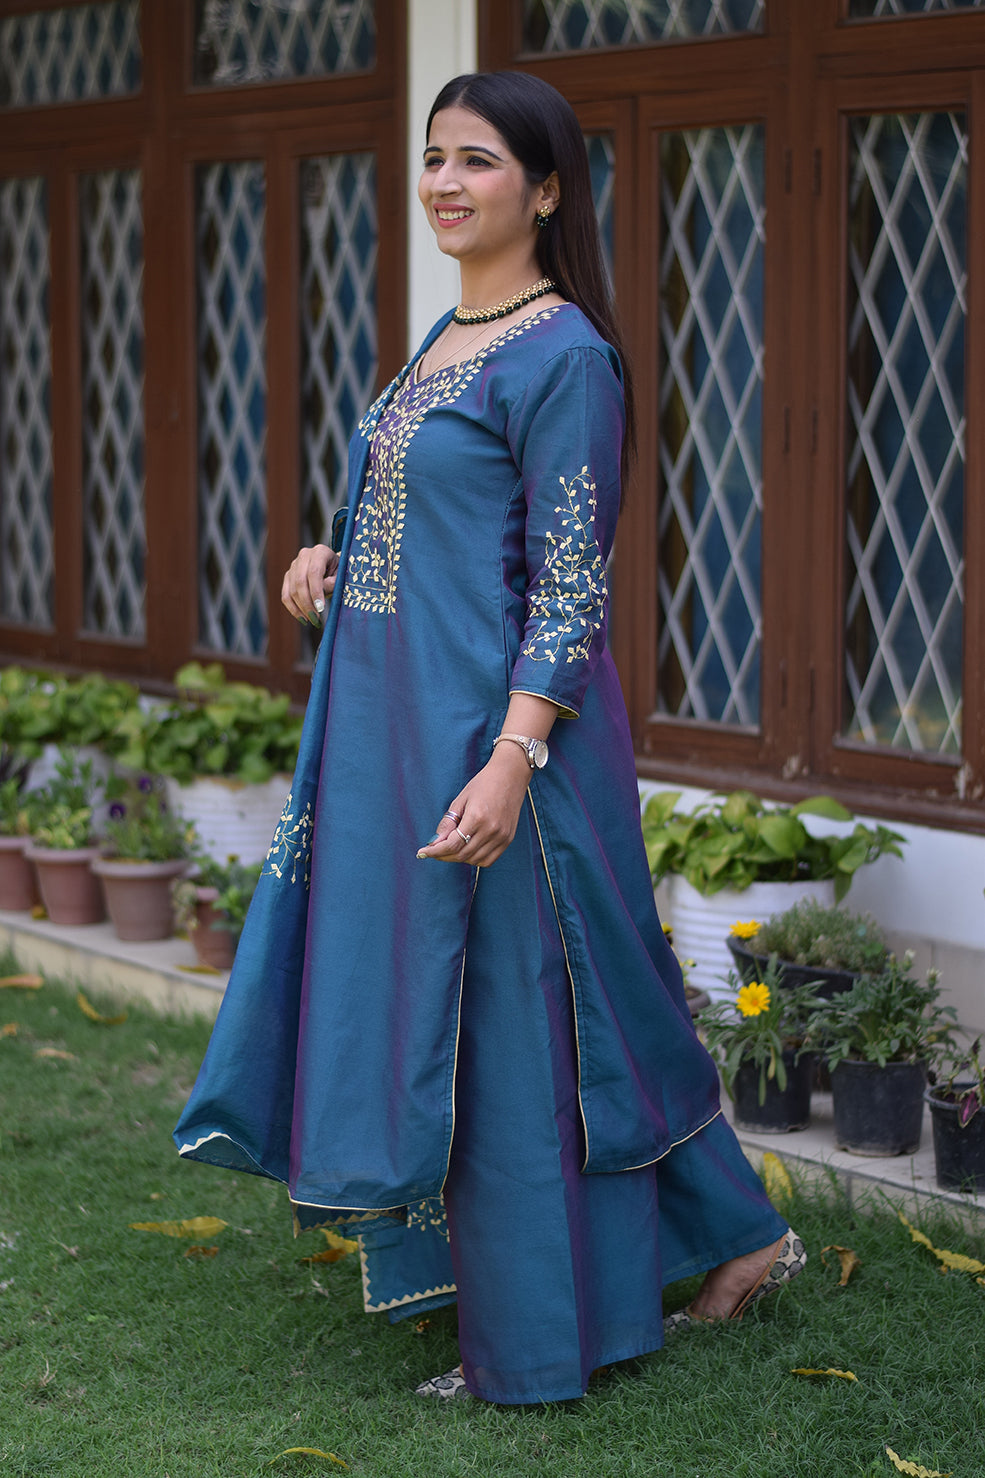 An Indian woman posing in a blue applique work suit with a serene expression.